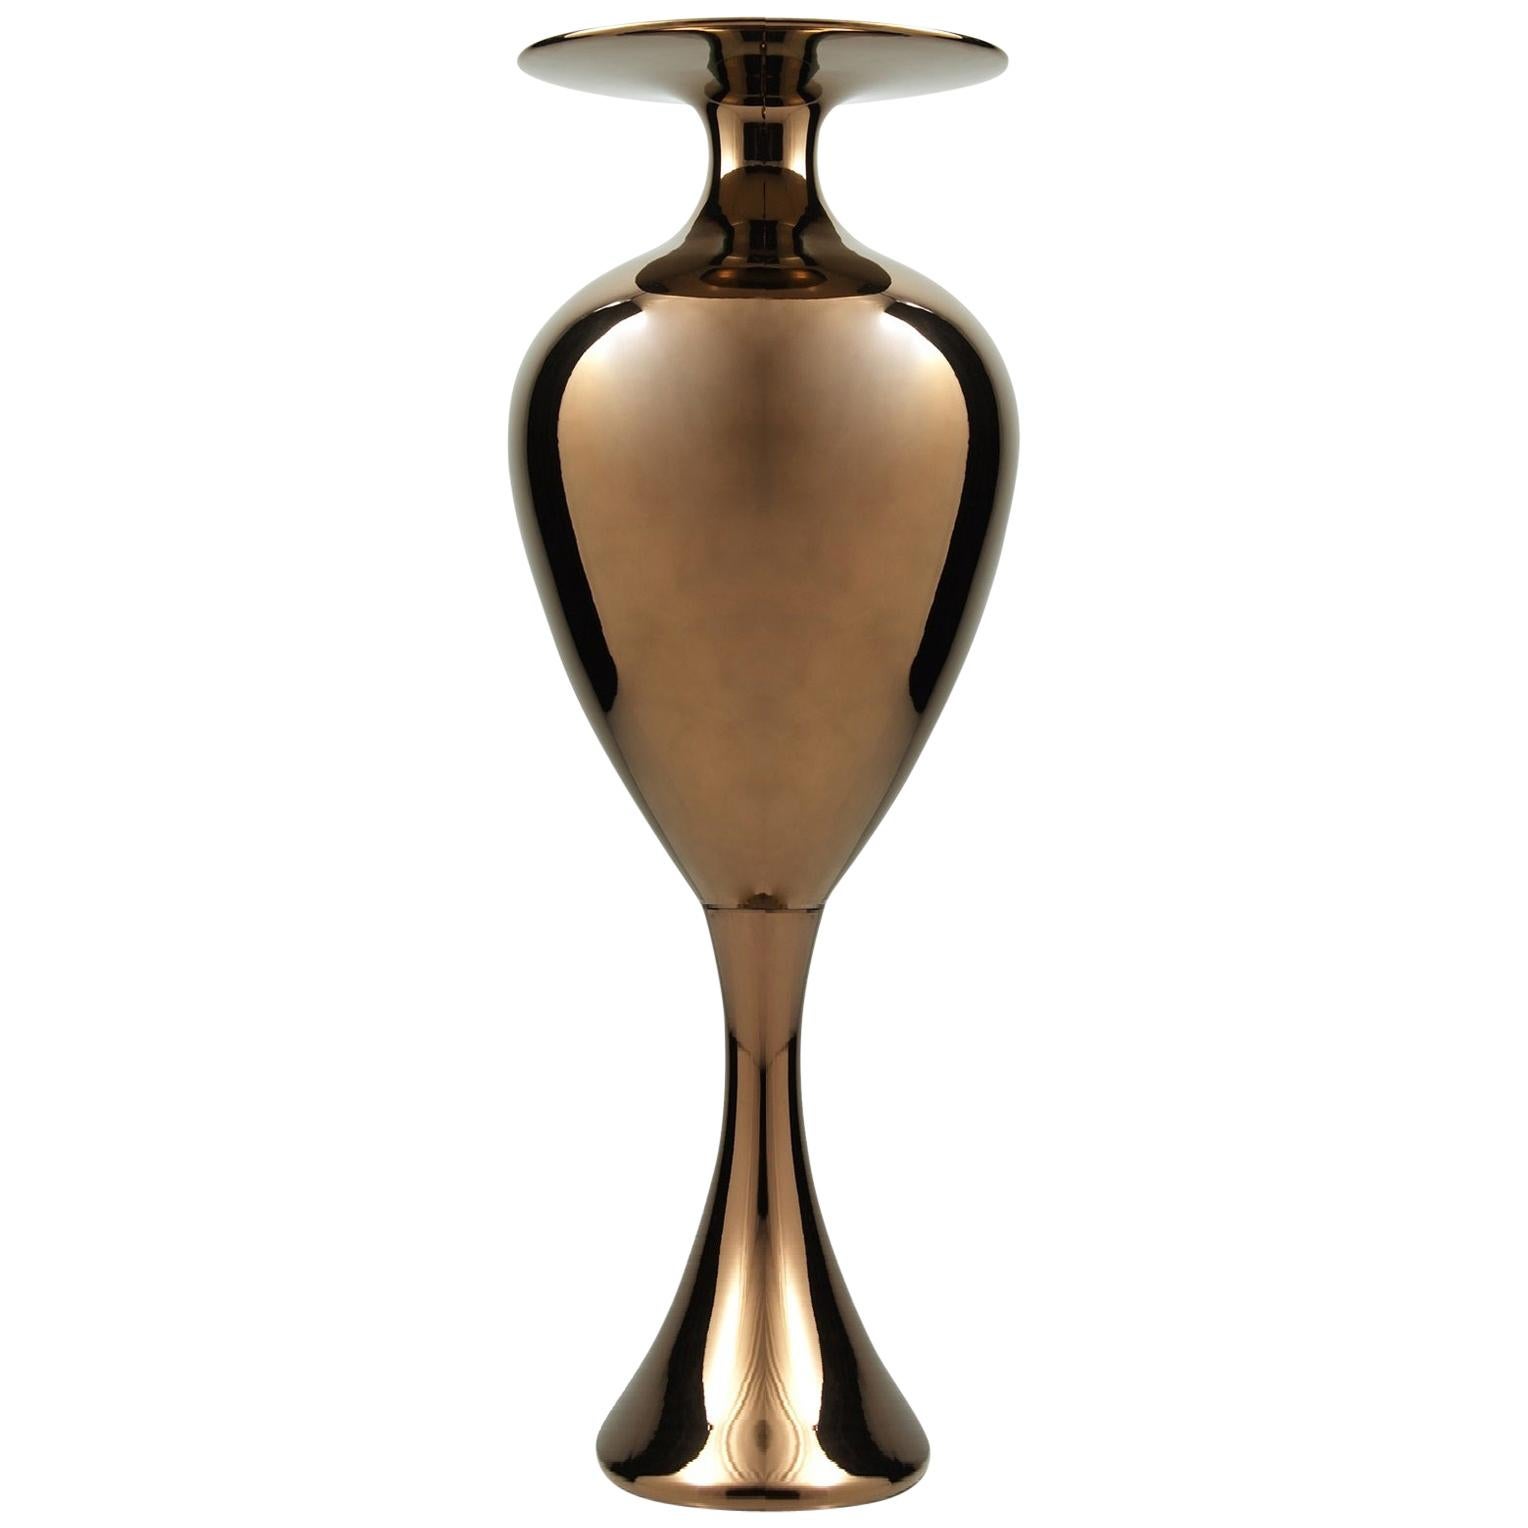 Ceramic Vase "CAMILLE-L" Handcrafted in Bronze by Gabriella B. Made in Italy For Sale